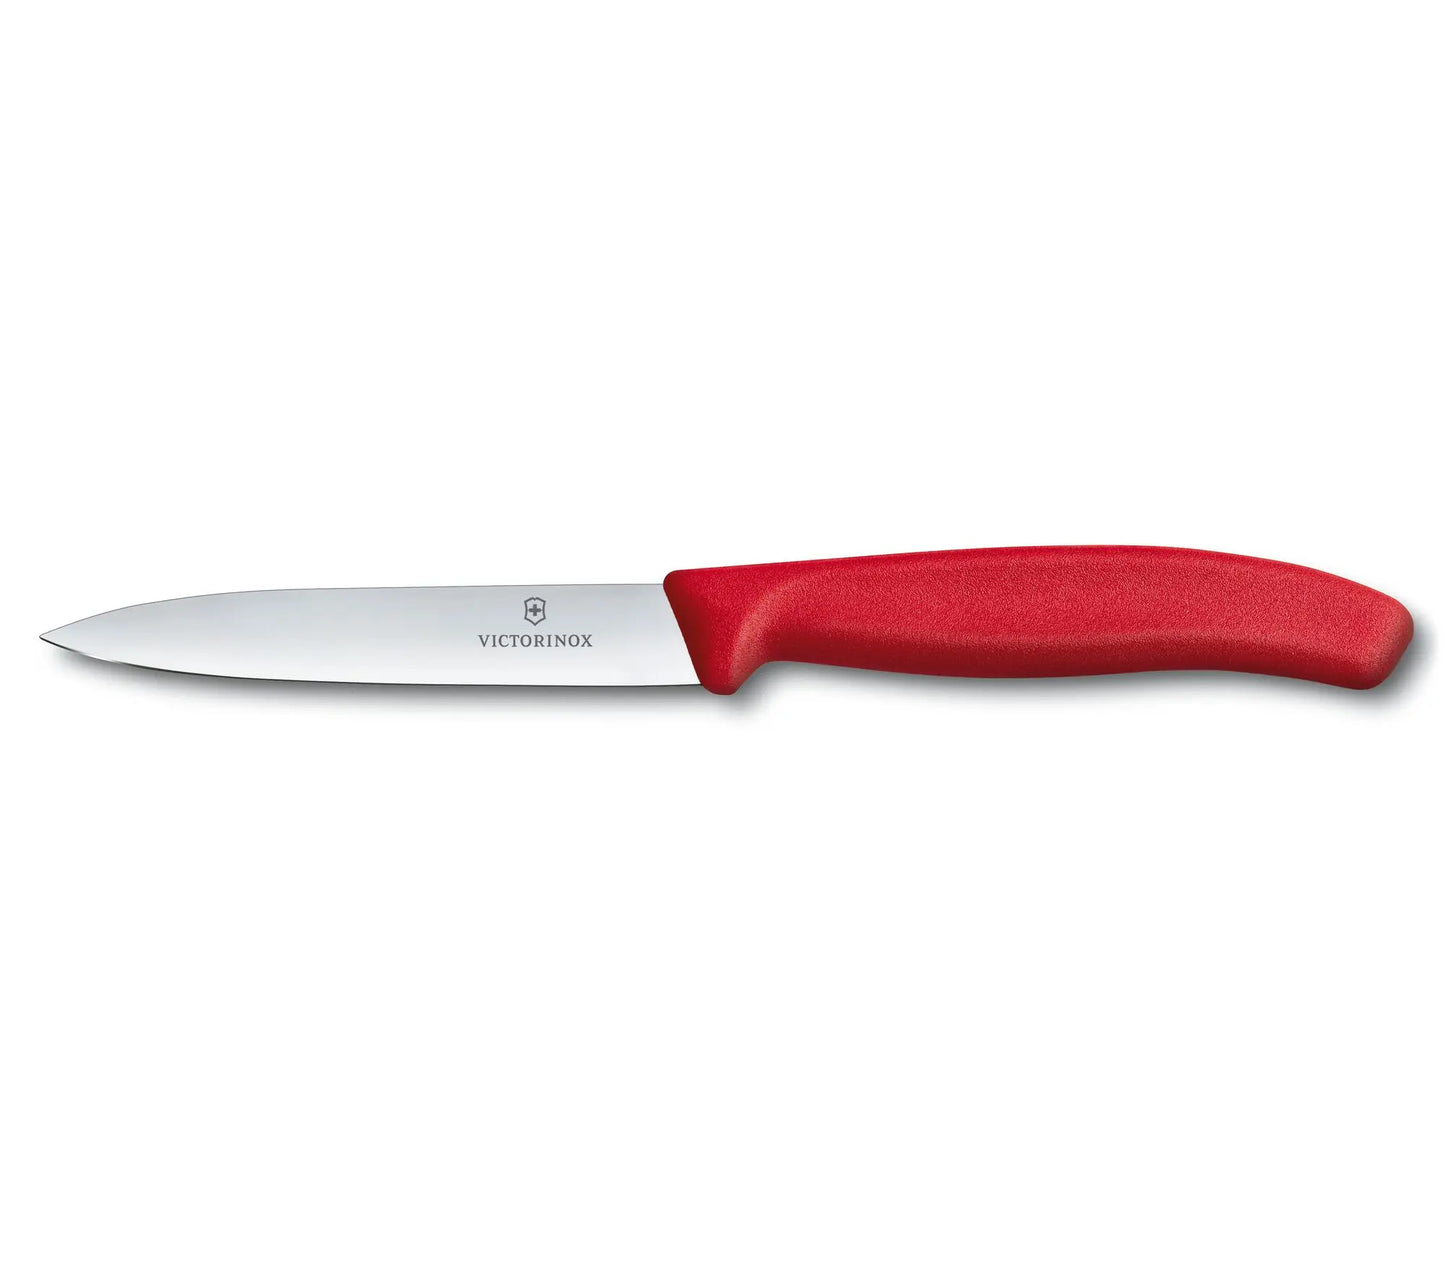 Victorinox Swiss Classic Paring Knife Pointed Tip - Red